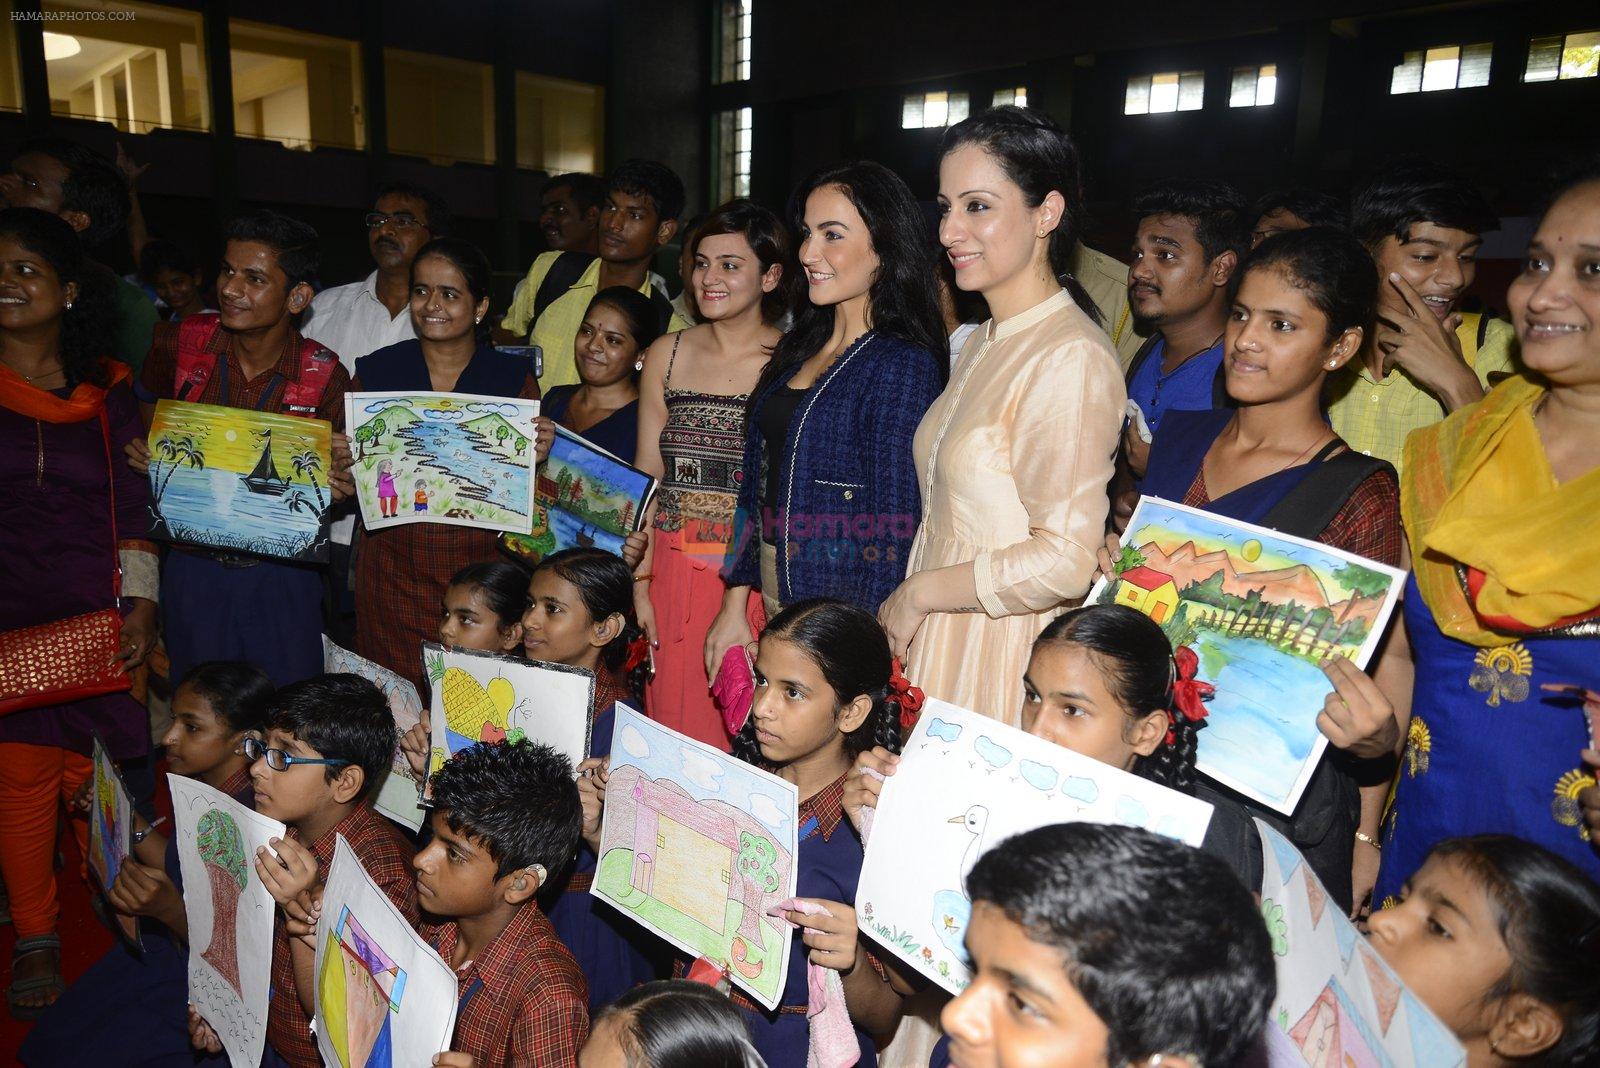 Elli Avram at Rouble Nagi and Rotary District 3141 Host World Deaf Day Art Camp and Cultural Activities on 24th Sept 2016